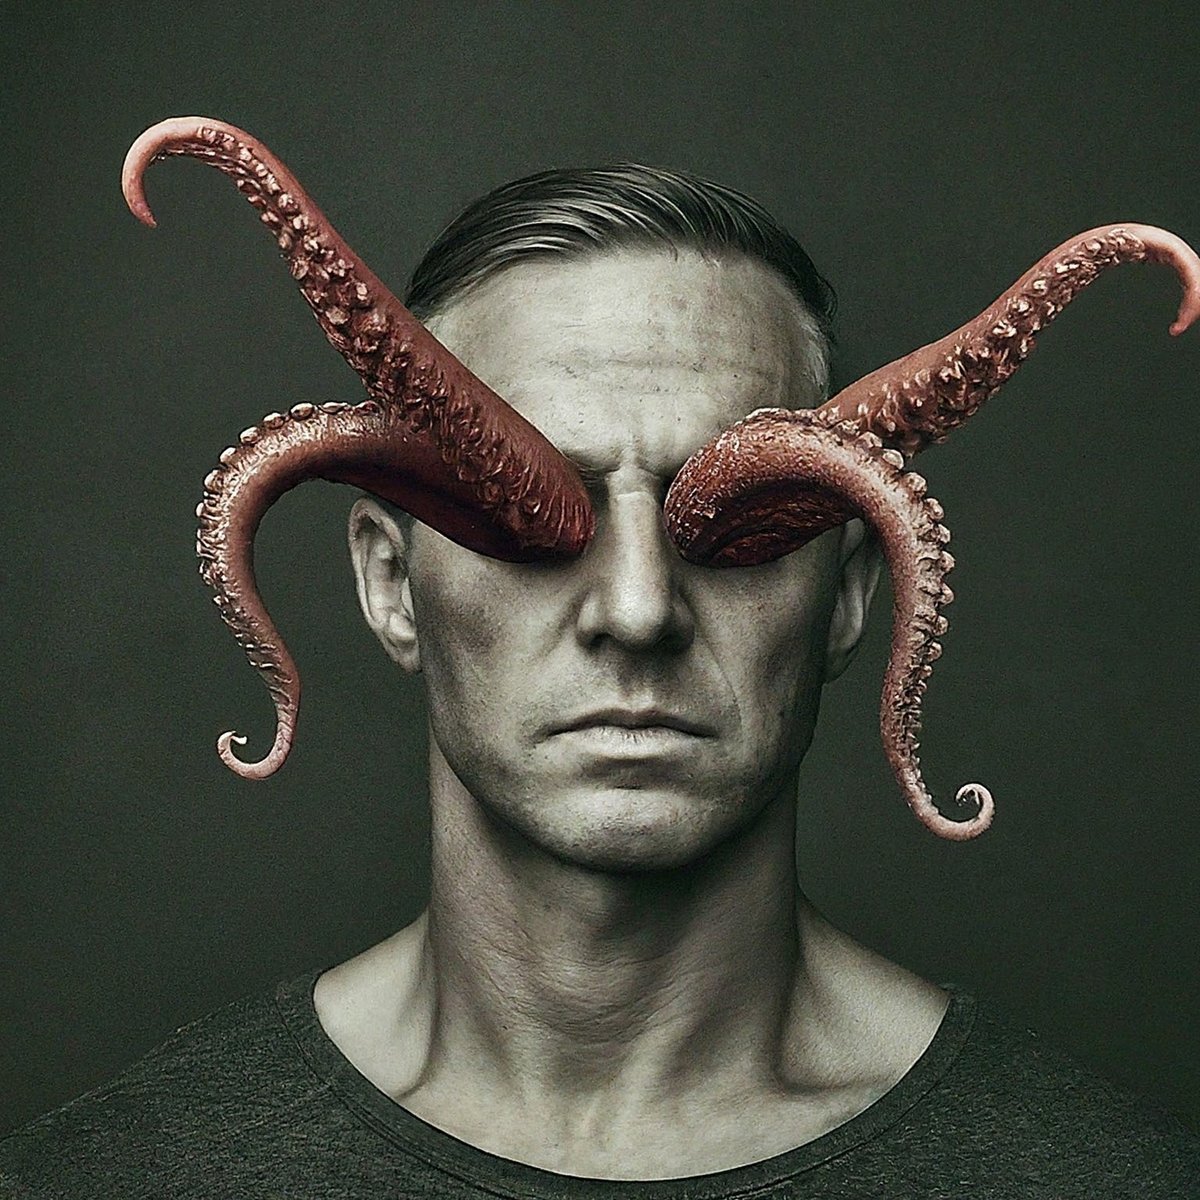 image_fx_human_with_tentacles_for_eyes.jpg